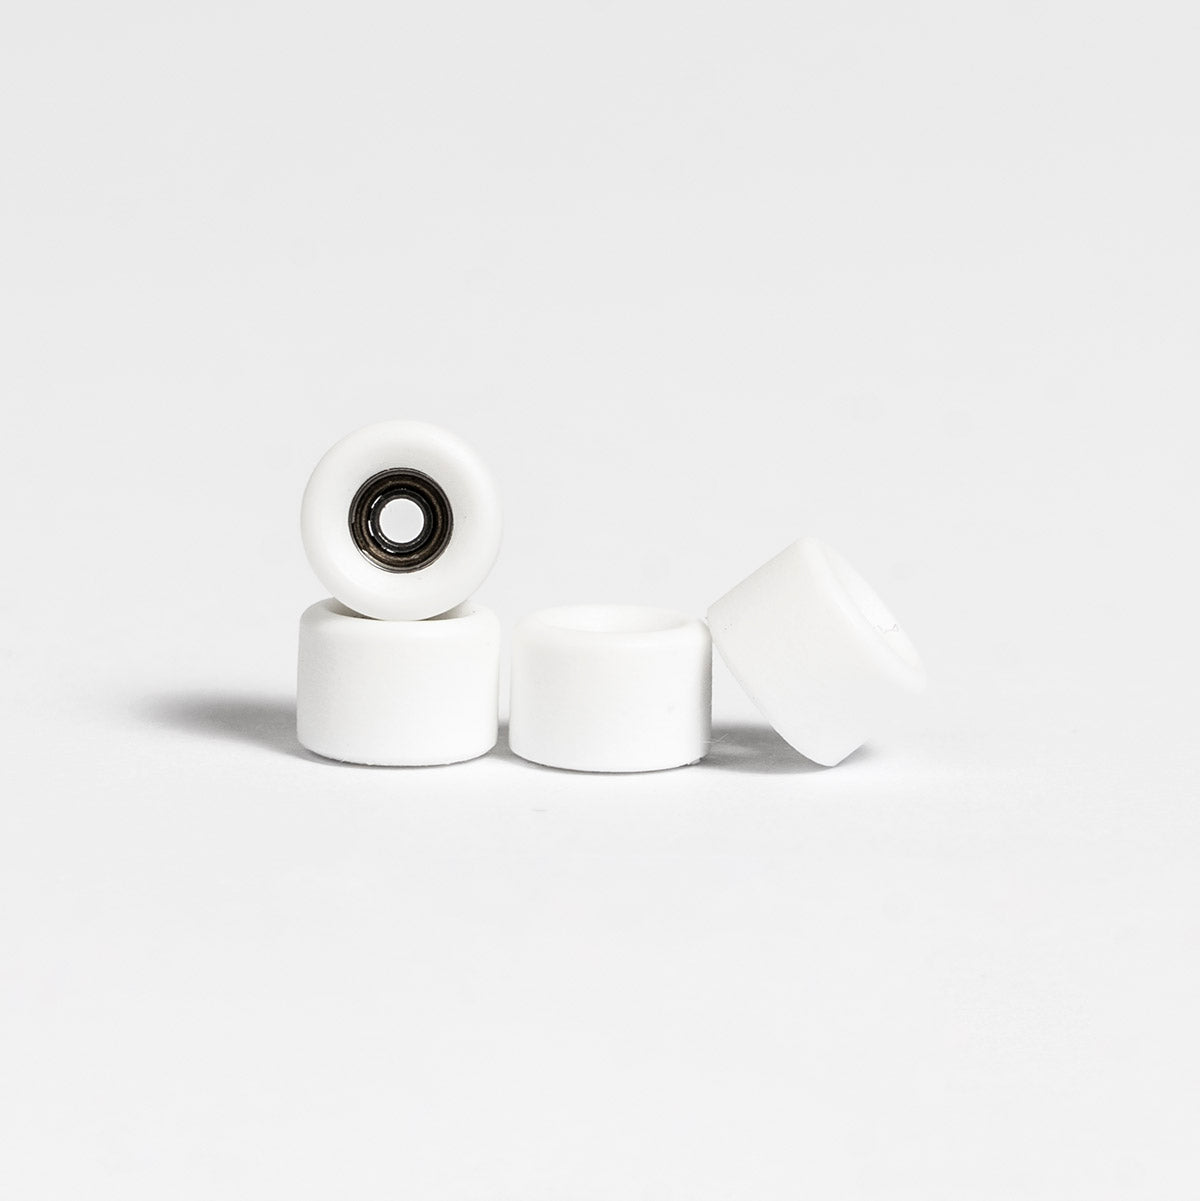 White Abstract Mini Conical Fingerboard Wheels